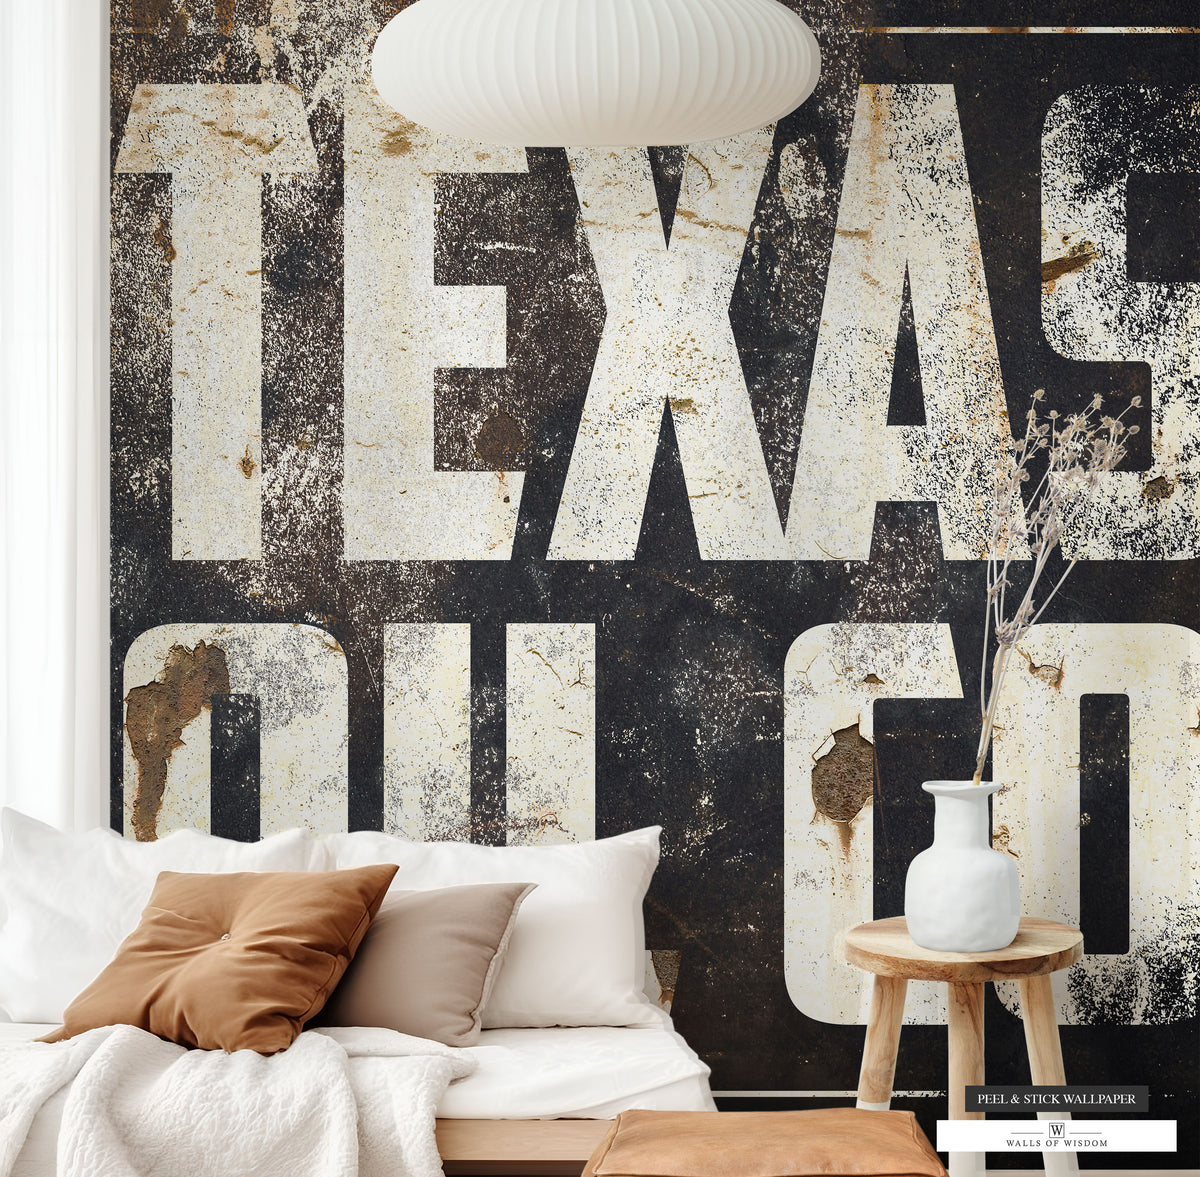 Rustic Texas Oil Co Peel & Stick Wallpaper featuring vintage industrial charm.